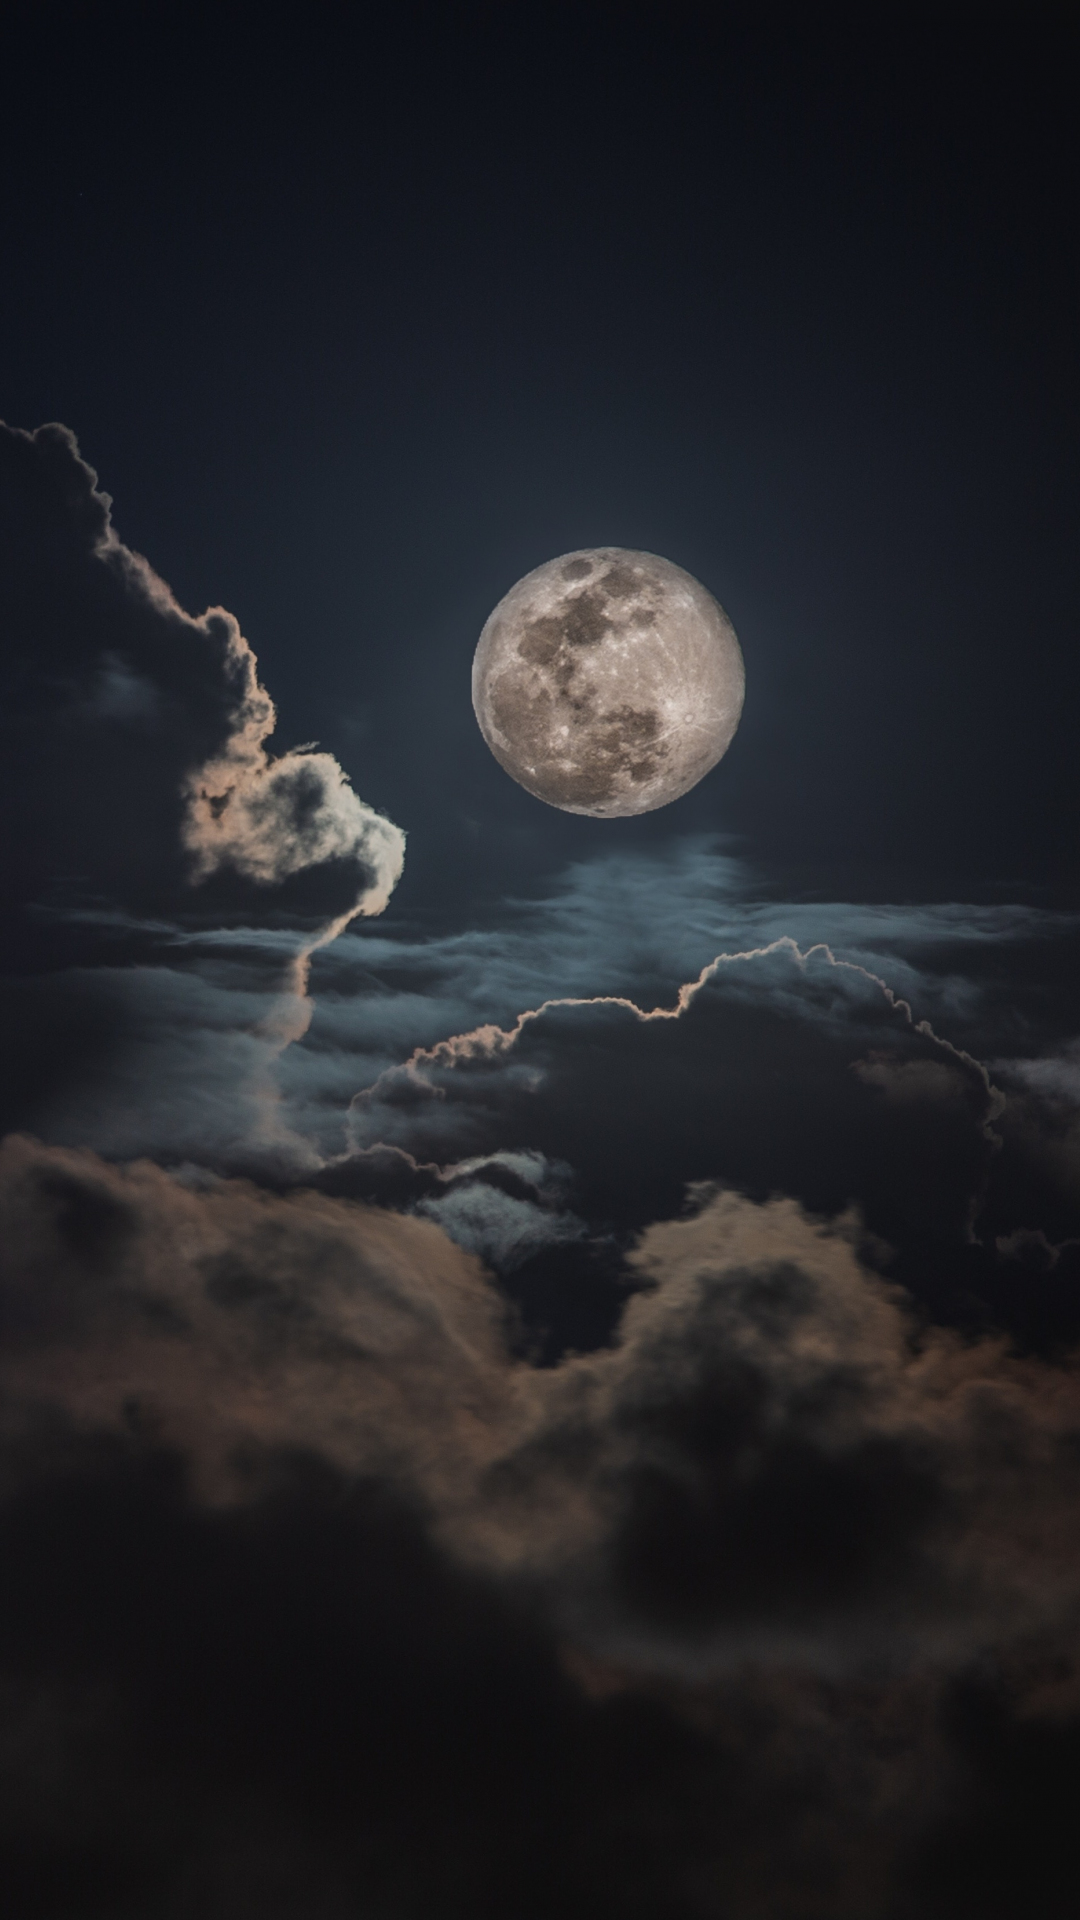 Download wallpaper 1080x1920 night, clouds and moon, sky, 1080p wallpaper,  samsung galaxy s4, s5, note, sony xperia z, z1, z2, z3, htc one, lenovo  vibe, google pixel 2, oneplus 5, honor 9,